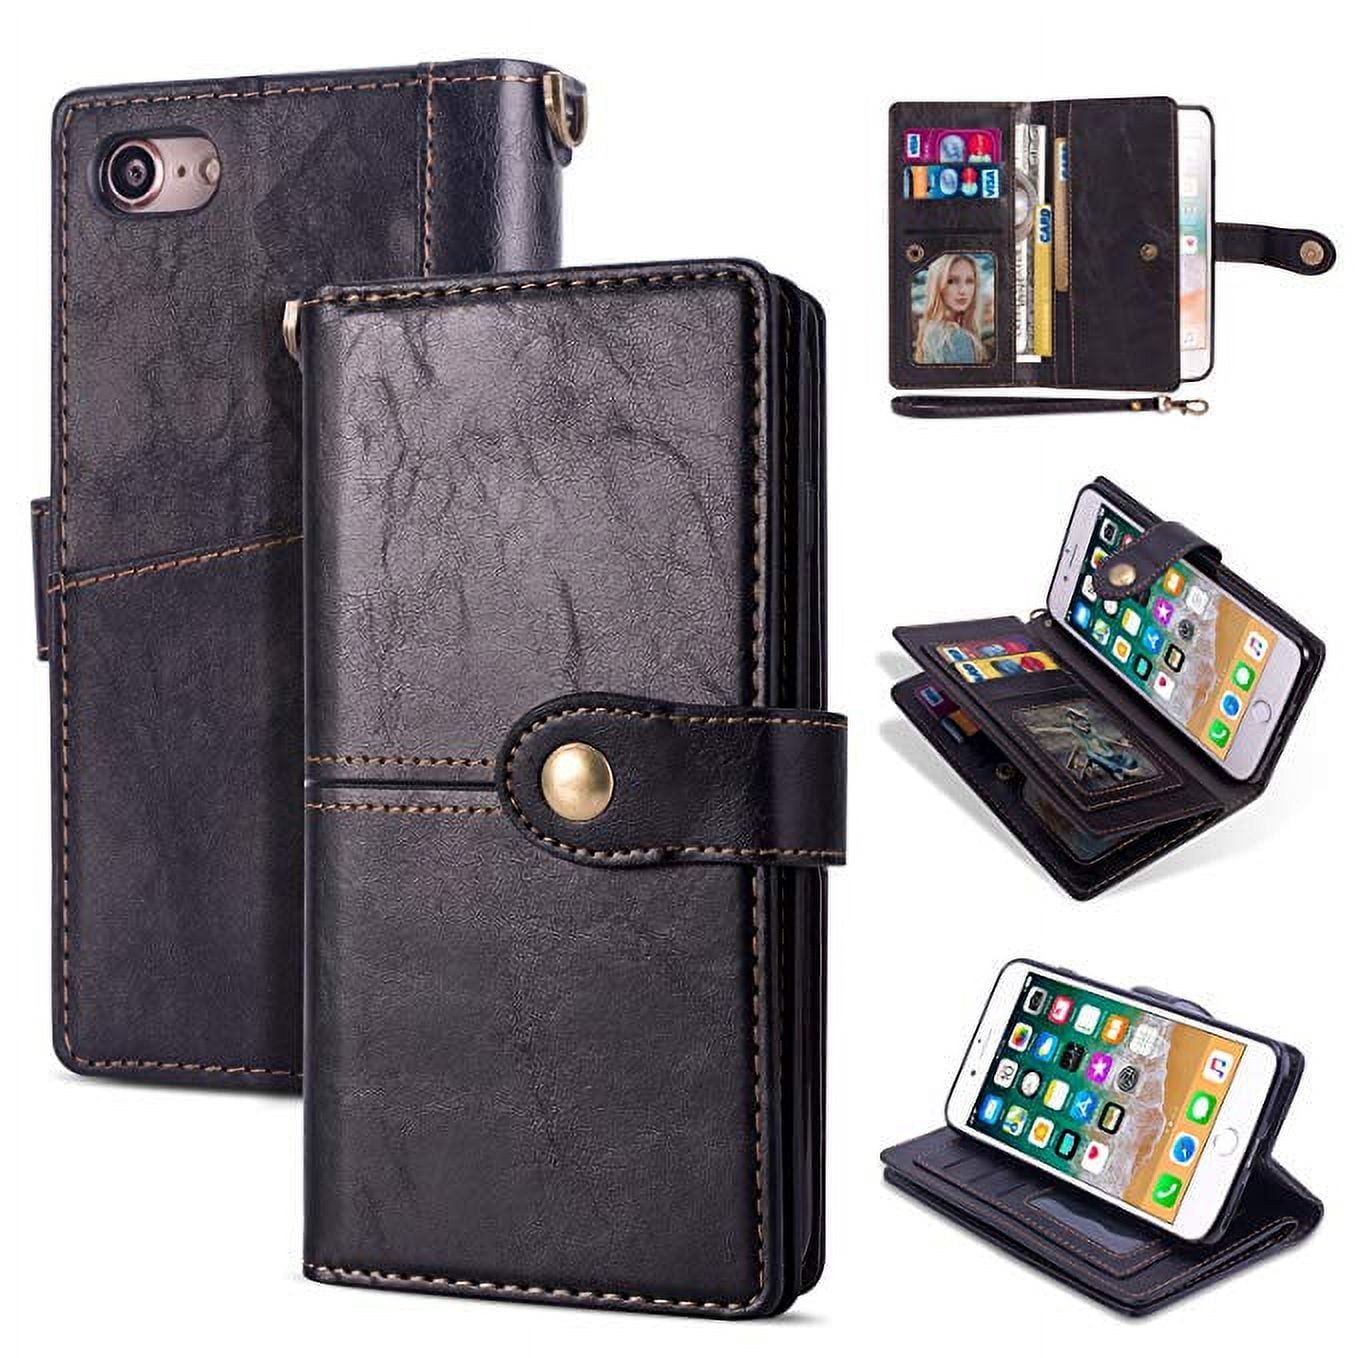 Top iPhone 6 Cardholder Cases for Convenience插图3